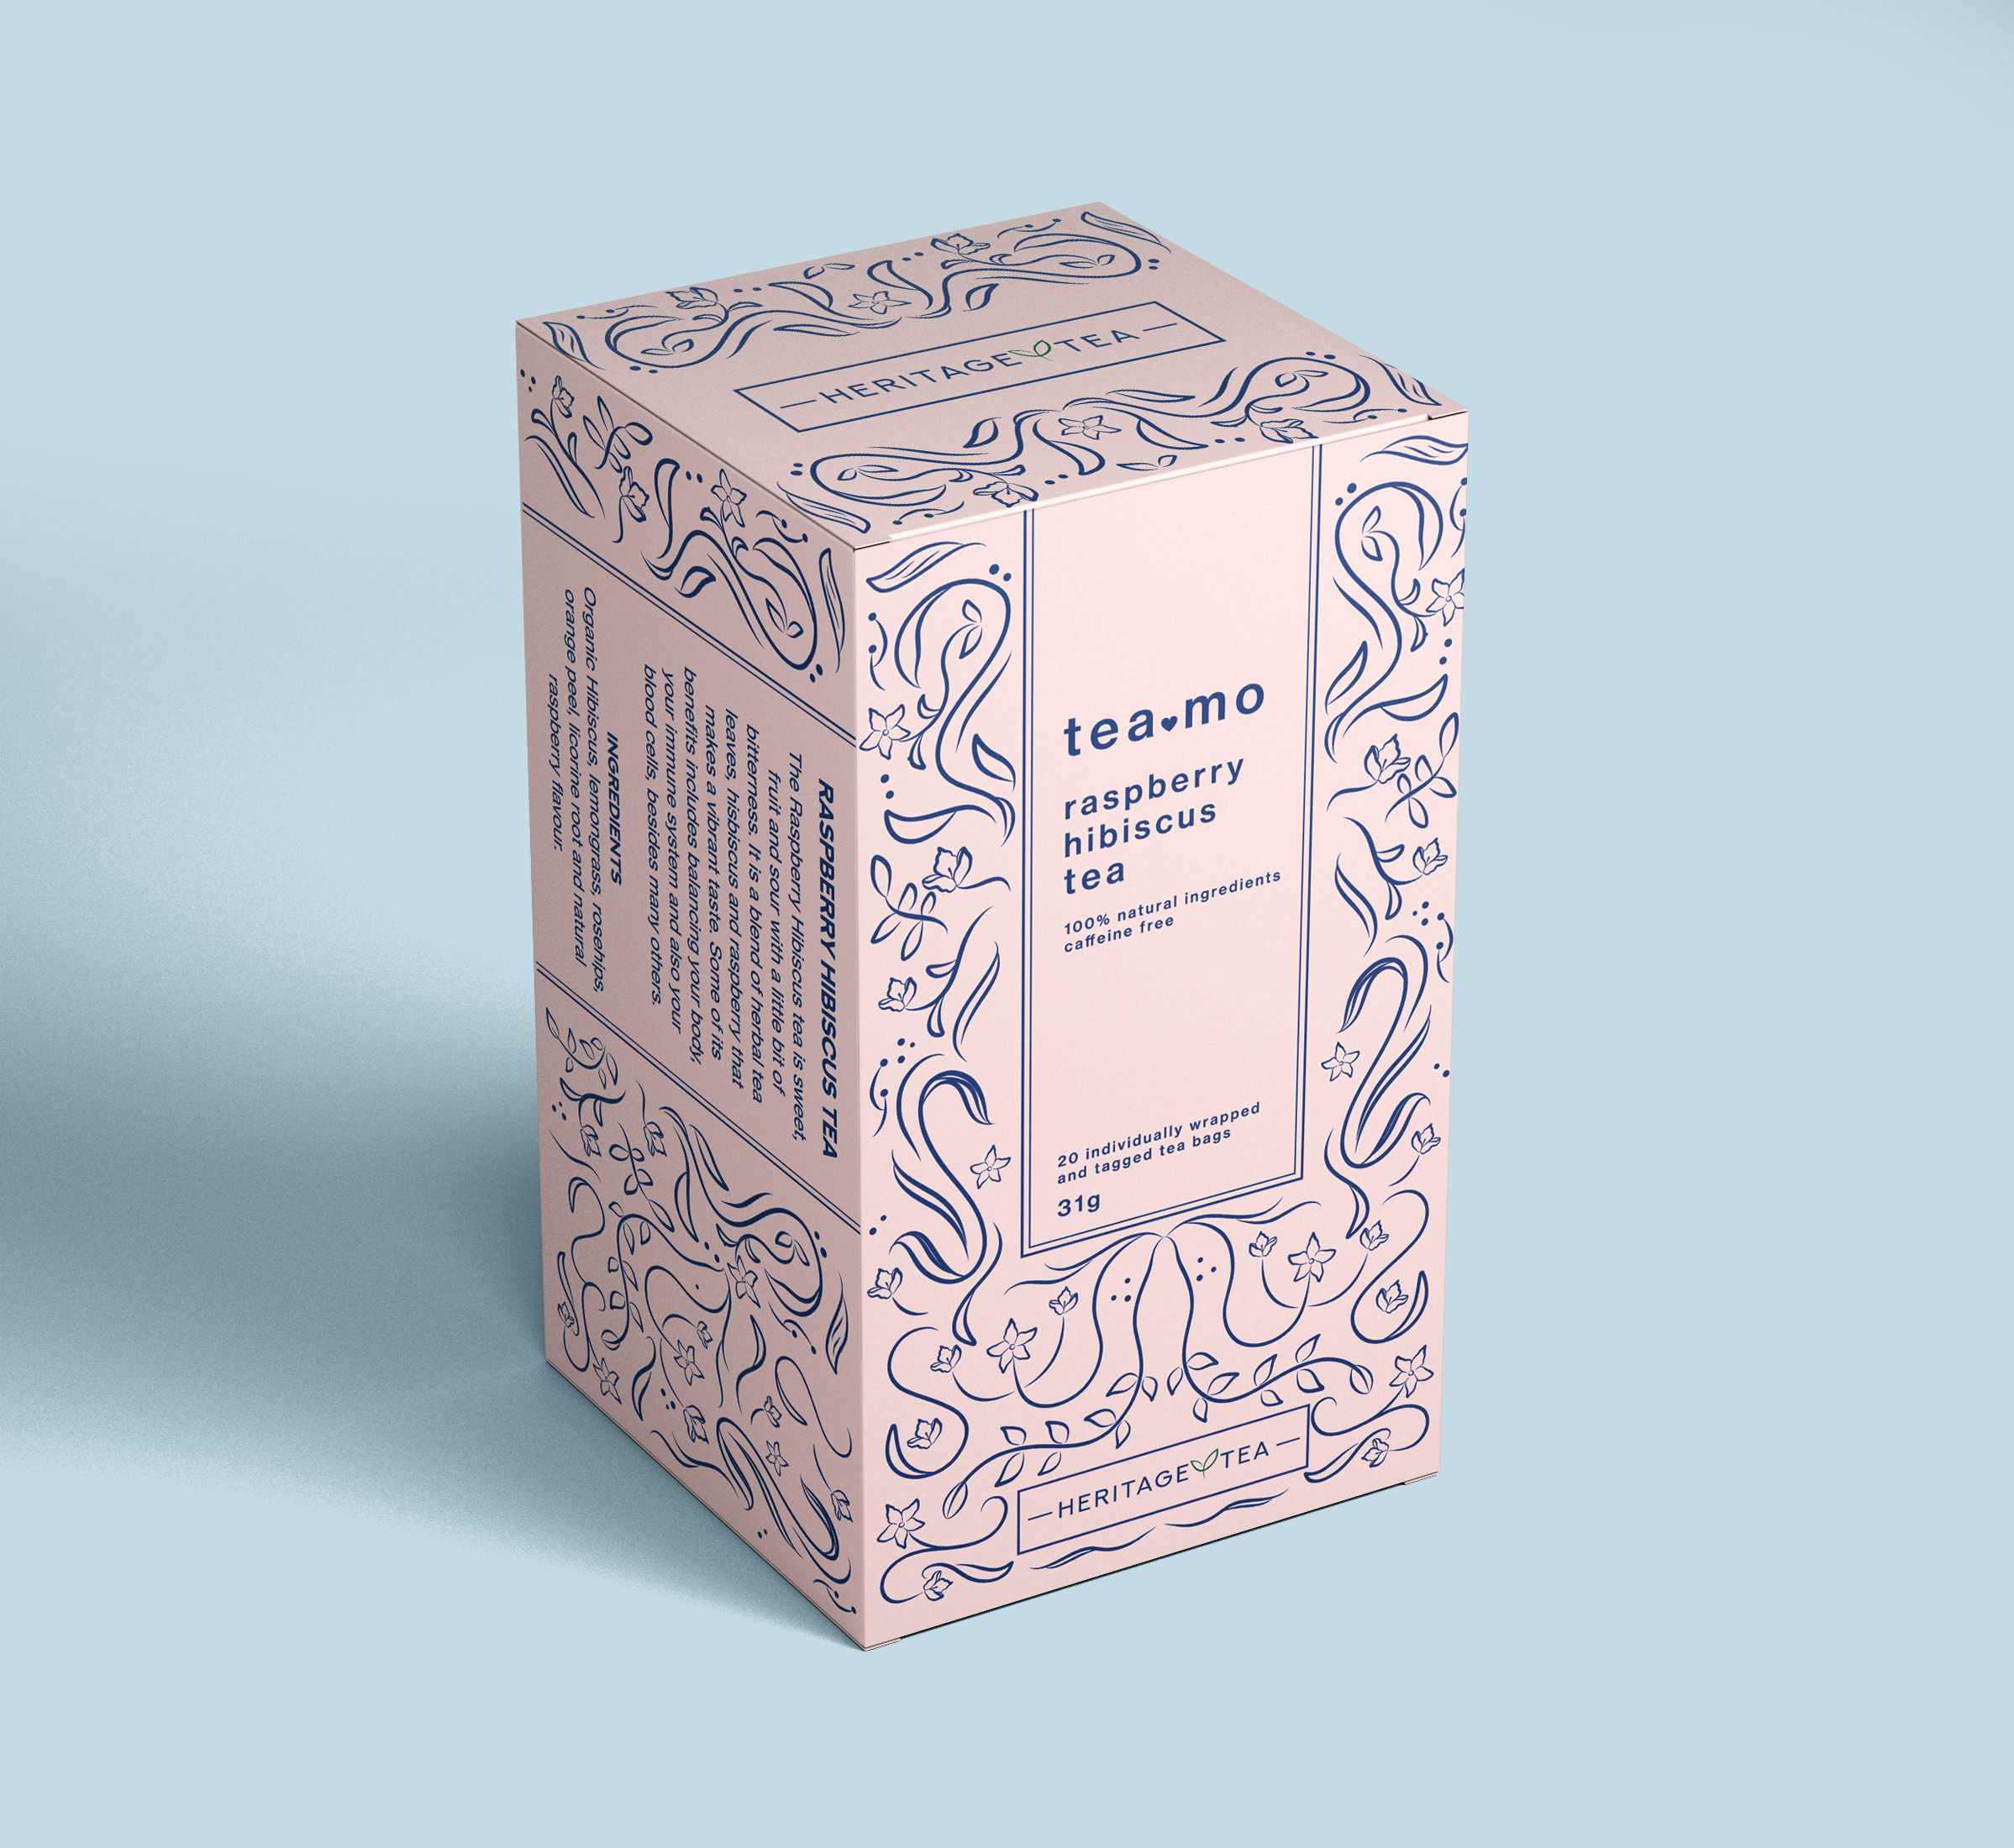 This is an image of a tea box.